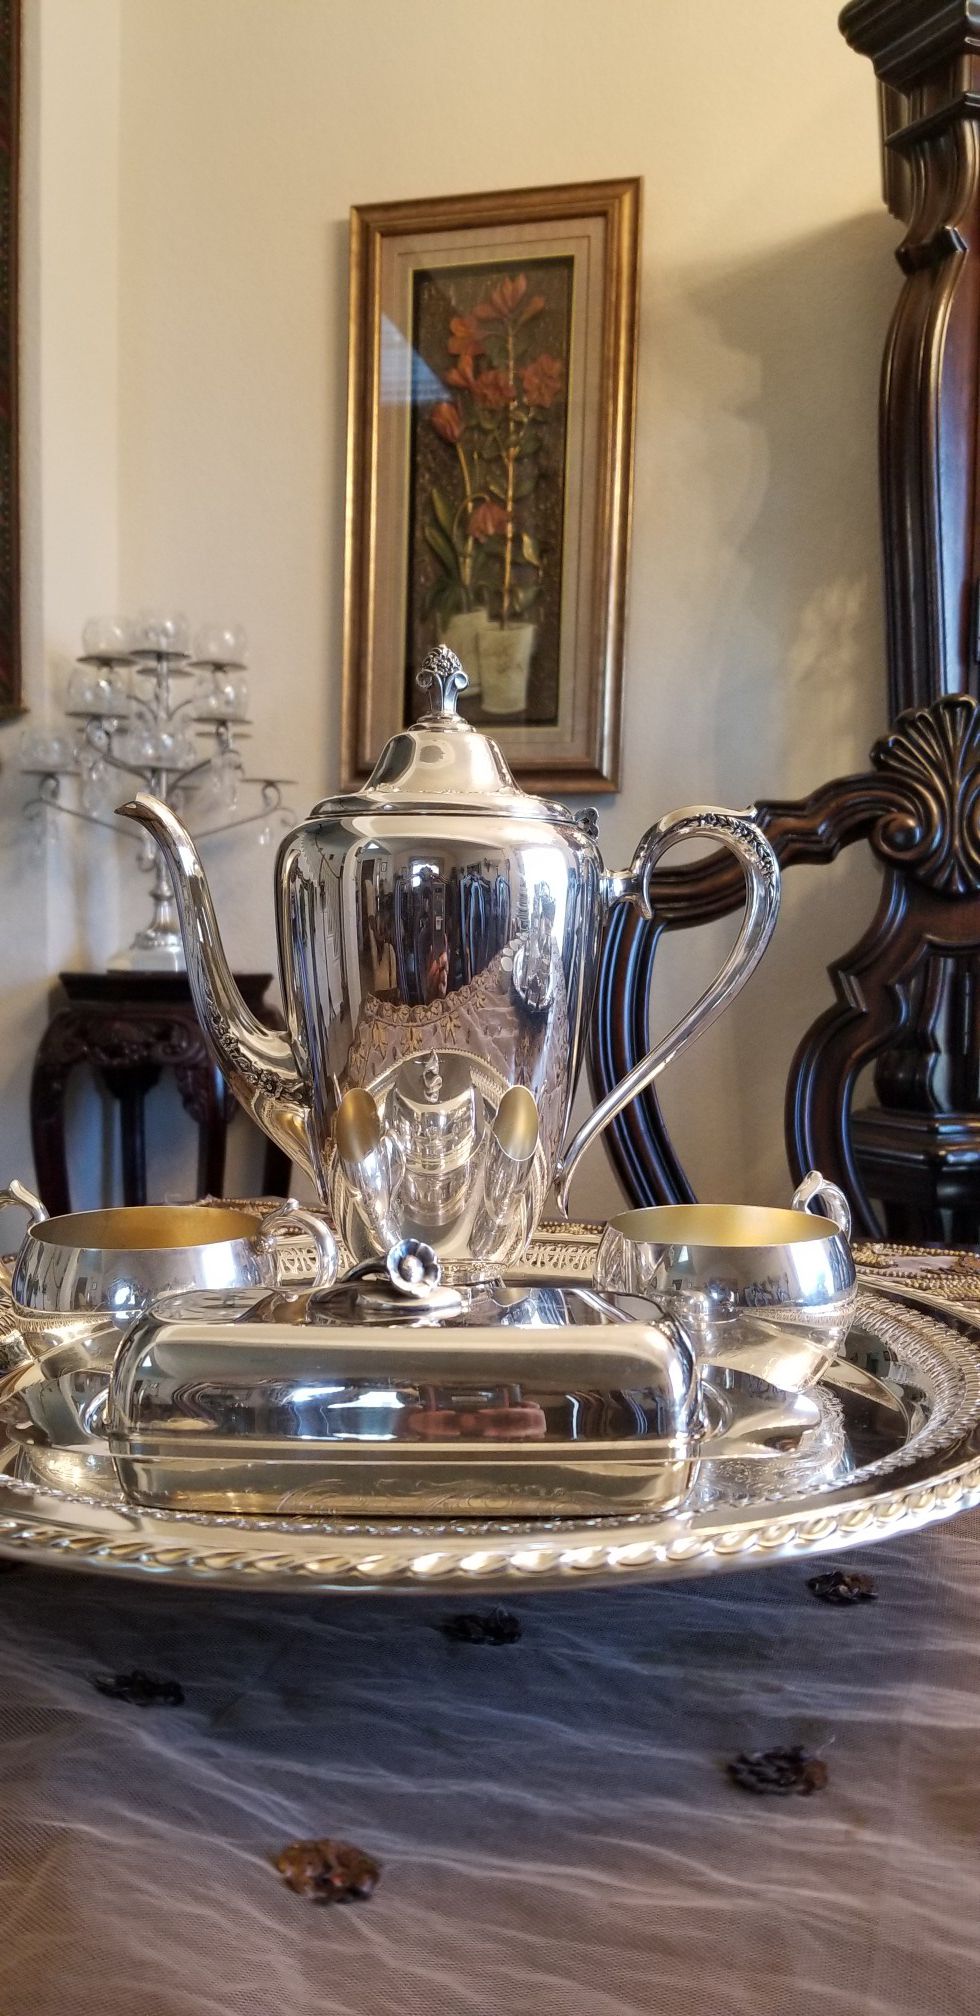 Silverplated tea set with butter dish and edge decorated tray